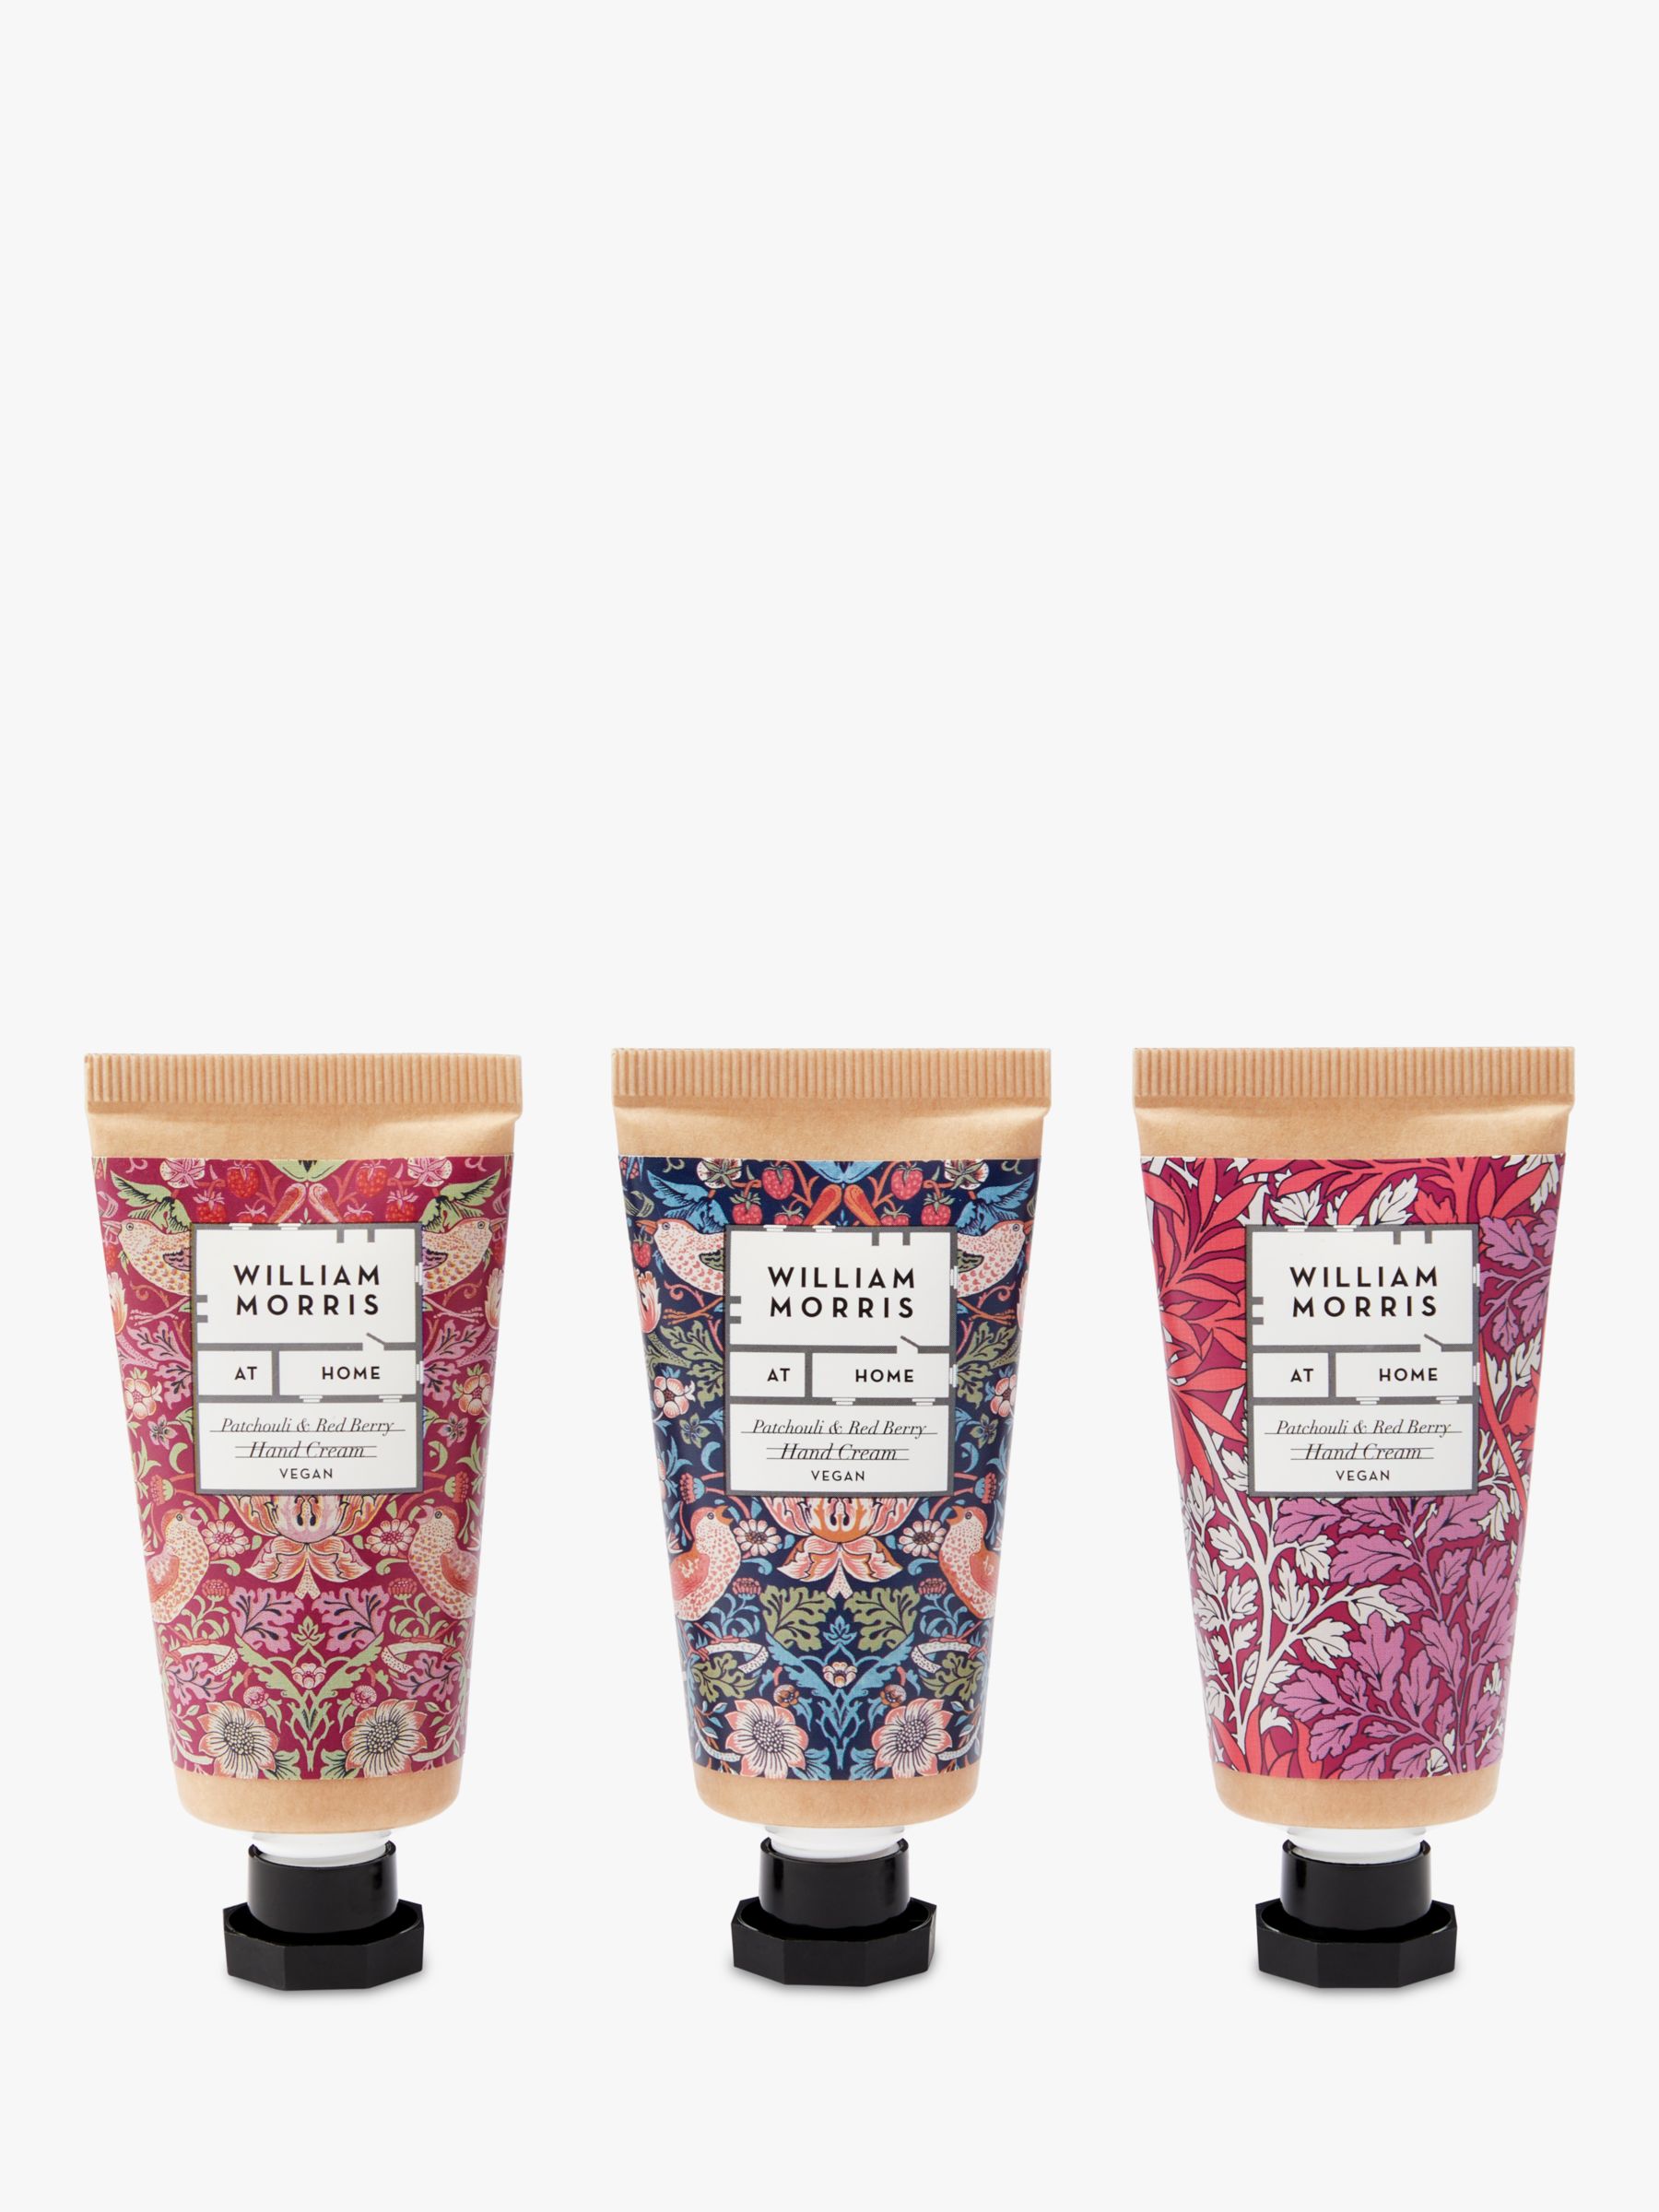 William Morris At Home Strawberry Thief Patchouli & Red Berry Hand Creams, Set of 3, 30ml 2